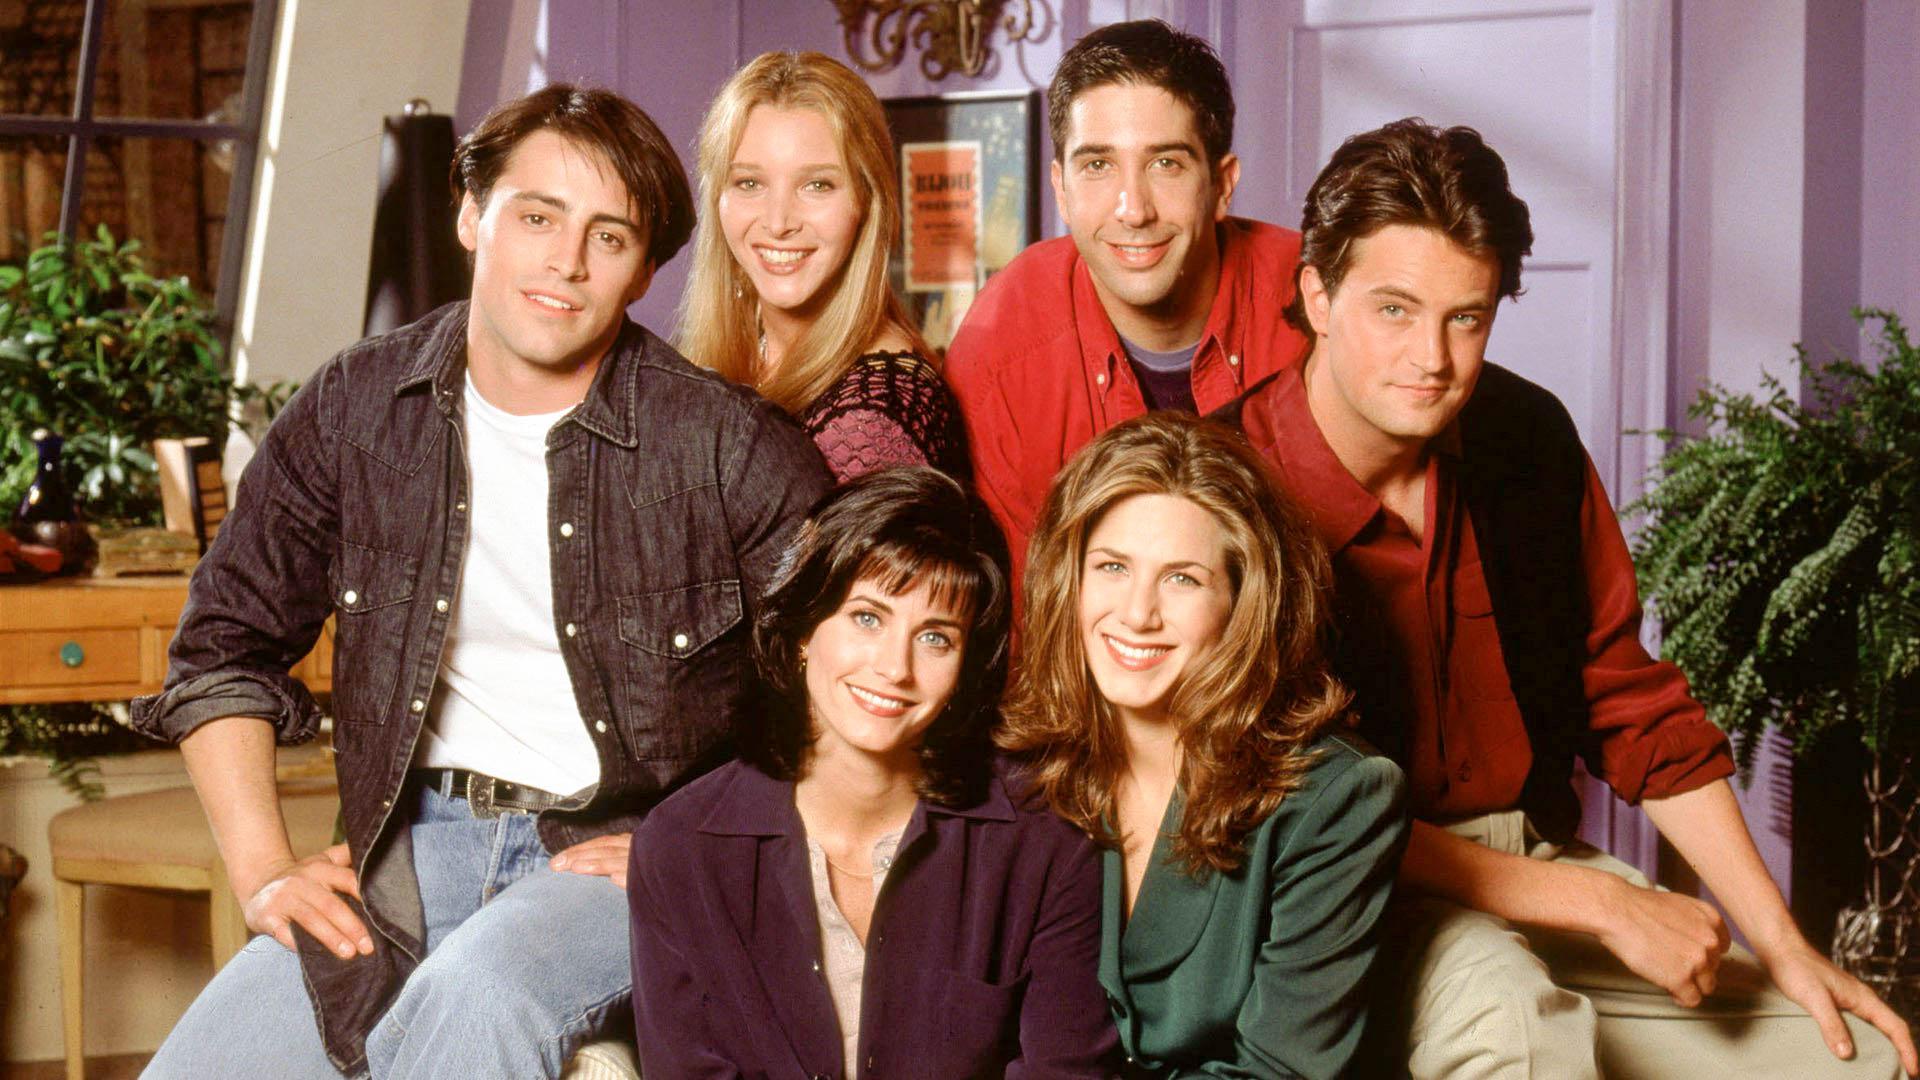 1920 x 1080 · jpeg - Tv Show Friends Some Beautiful HD Wallpapers In High Definition - All ...